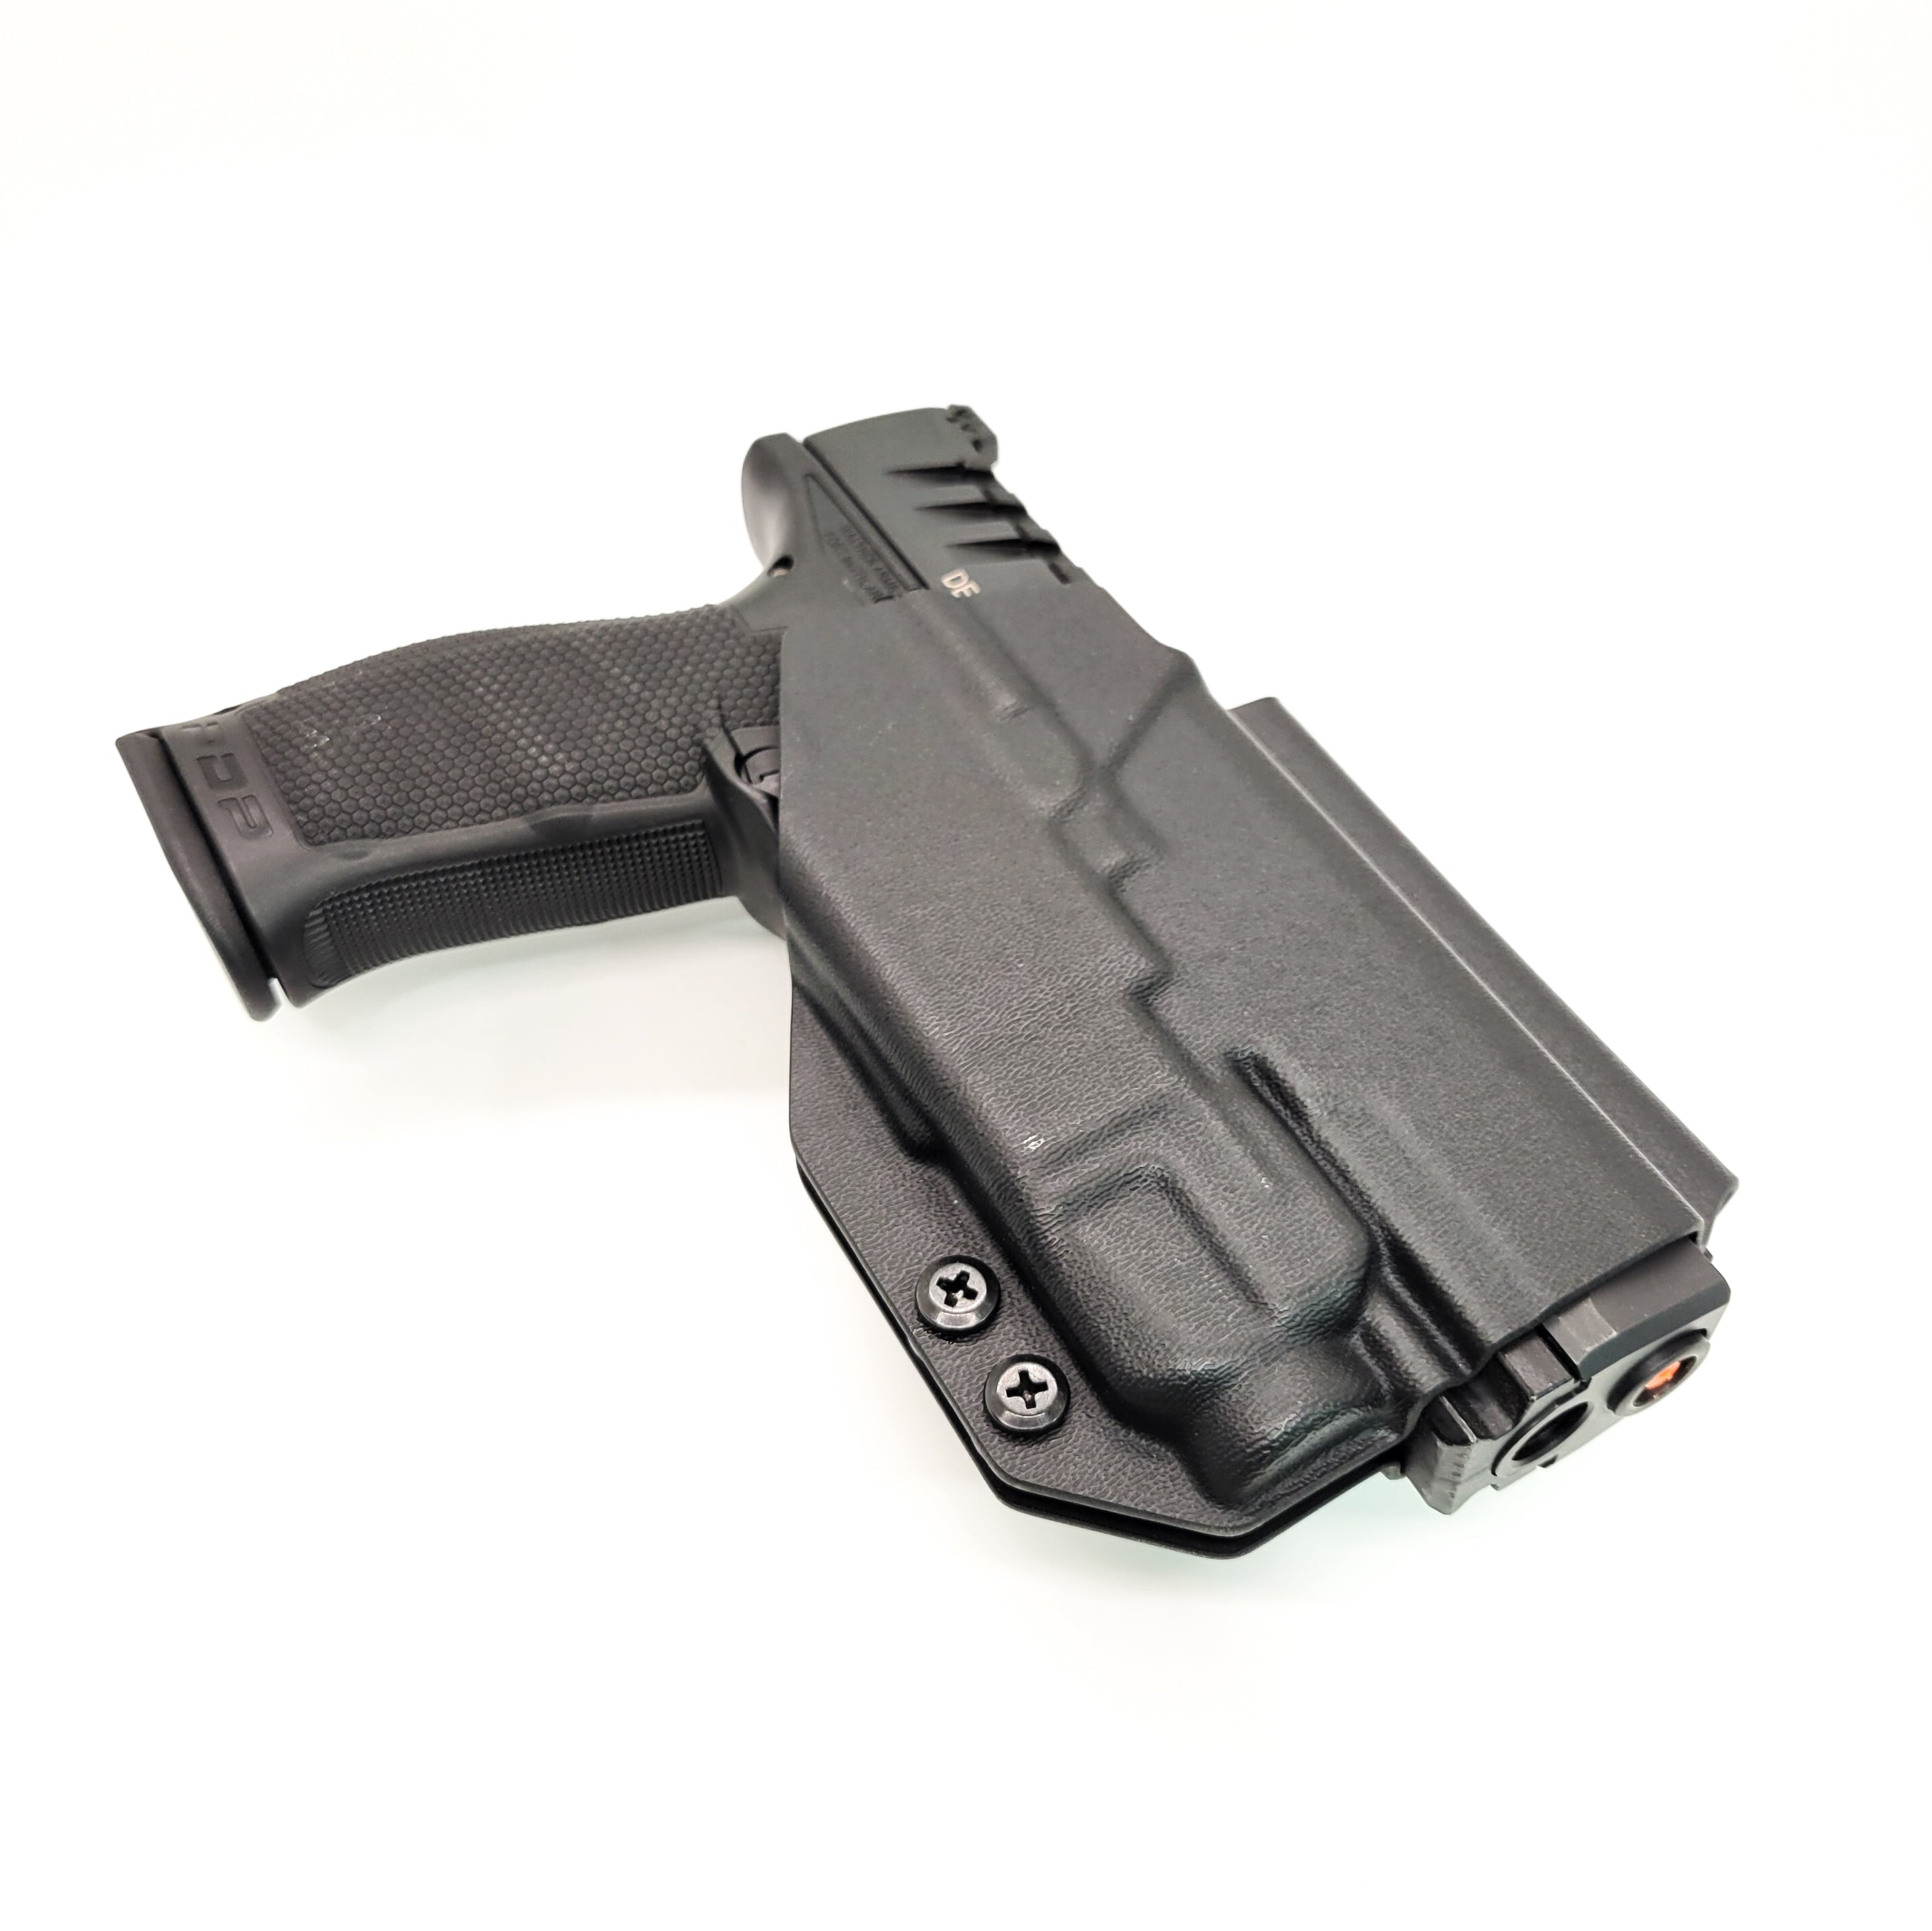 For the best Outside Waistband Taco Style Holster designed to fit the Walther PDP Compact 4" pistol with the Streamlight TLR-7A or TLR-7 mounted on the firearm, shop Four Brothers Holsters. Cut for red dot sight, full sweat guard, adjustable retention & open muzzle for threaded barrels & compensators. 